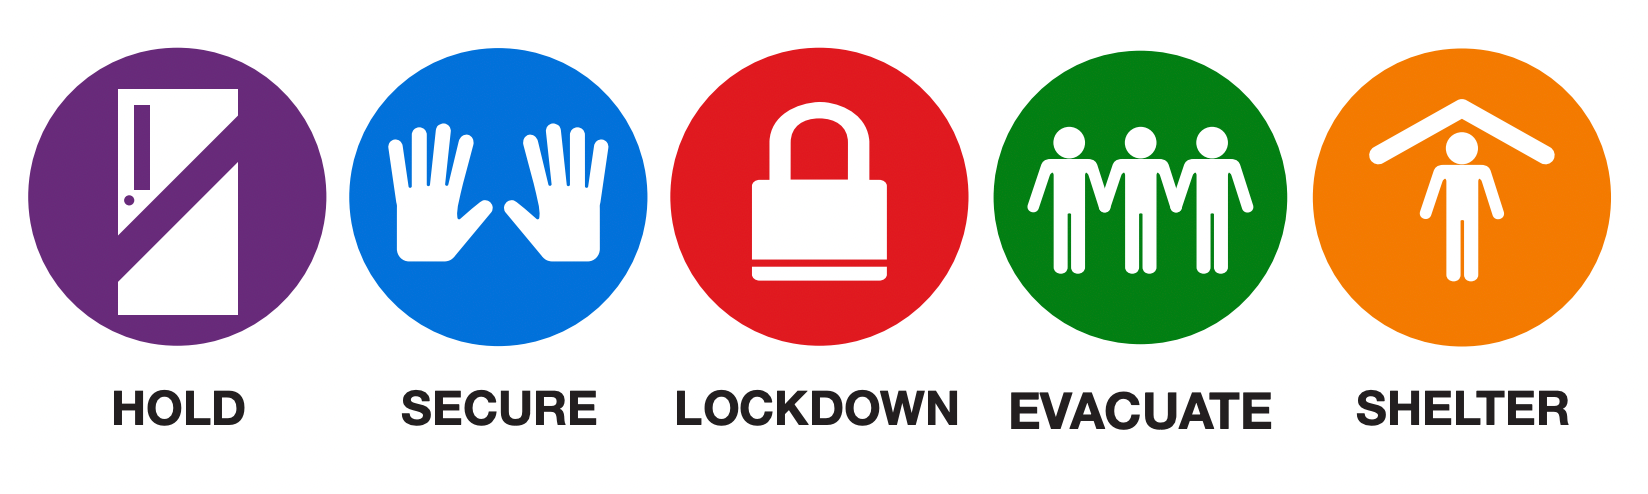 Lockout (blue circle with exclamation point). Lockdown (red circle with lock). Evacuate (green circle with people standing side-by-side). Shelter (yellow circle with person standing under a roof).